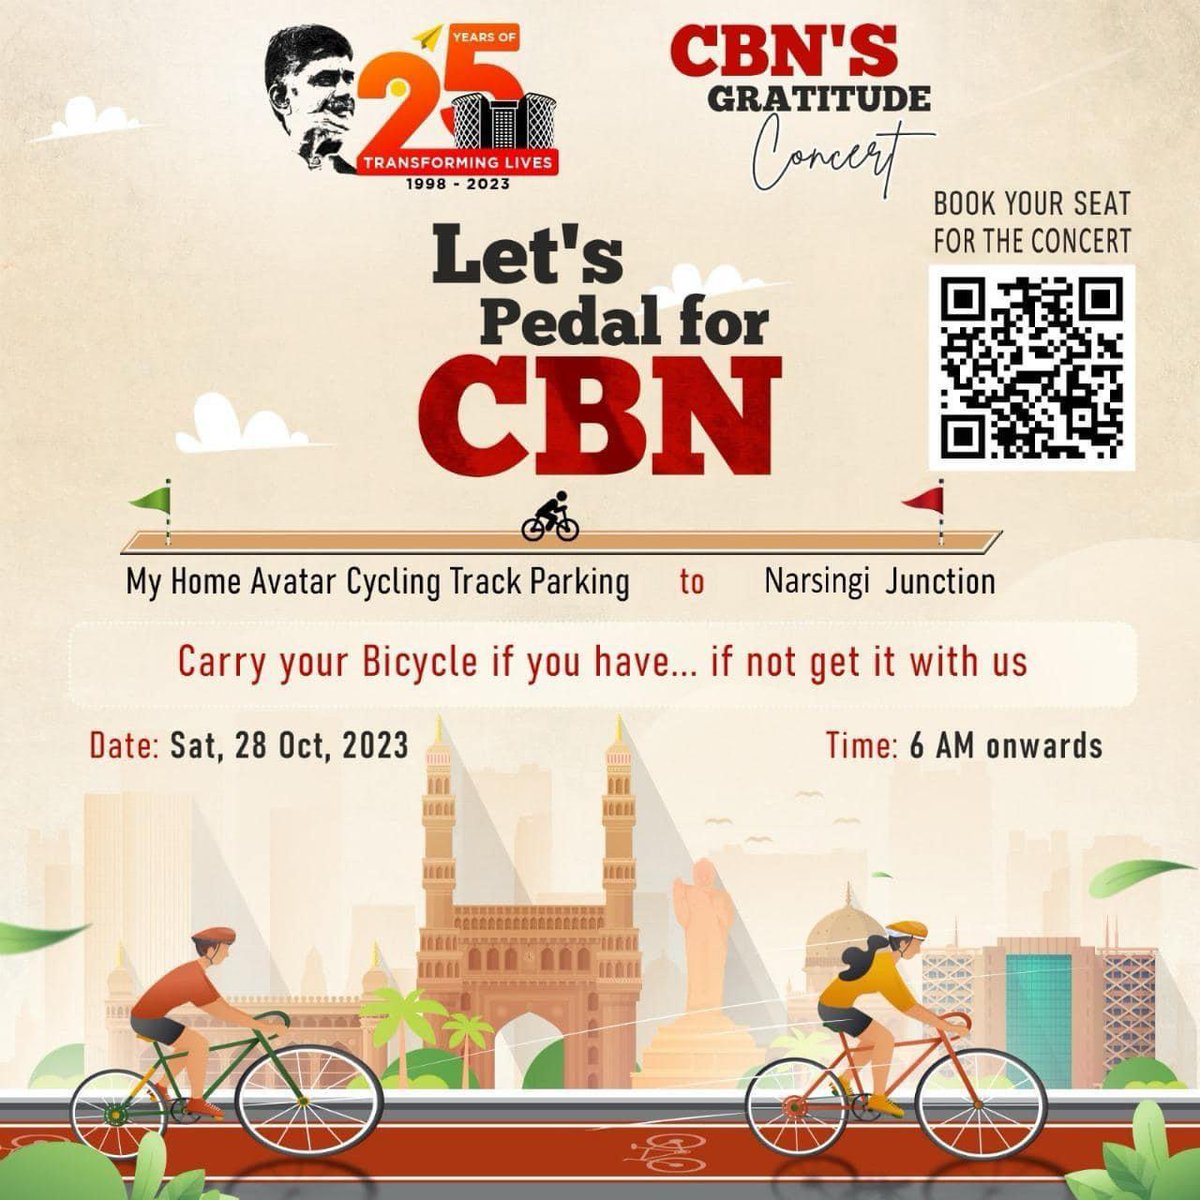 *Let’s Pedal for CBN*

Let’s ride for CBN on this Saturday 28th from 6:00 am to 7:00 am 
In case you don’t have a bicycle, we will arrange 
Come, Let’s Pedal for a cause  

#ThankYouCBNEvent
#25YearsOfTransformation
#25YearsOfHitechCity
#CBNConcert